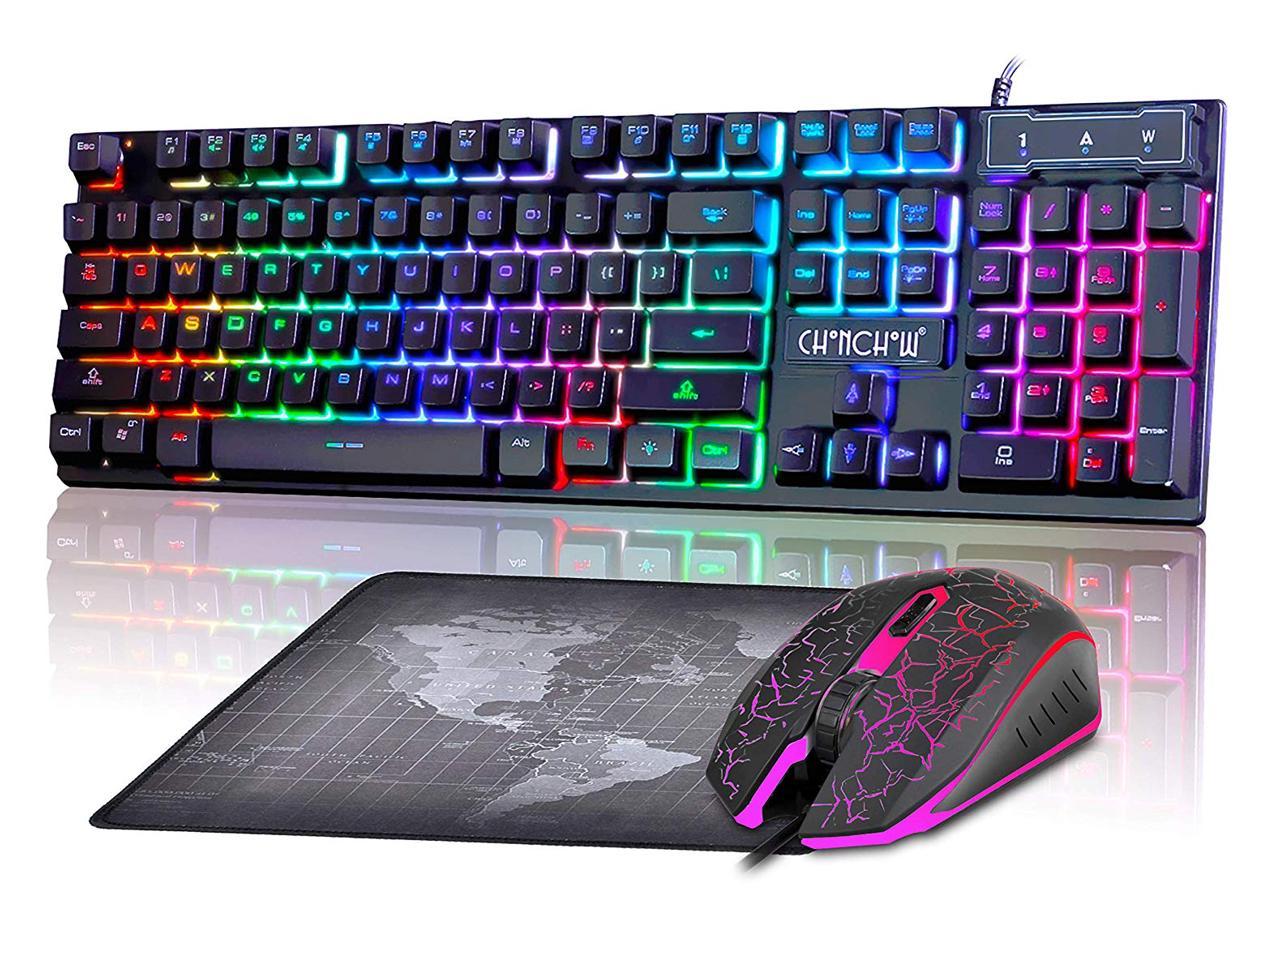 CHONCHOW LED Backlit Wired Gaming Keyboard and Mouse Combo Mechanical Feeling Rainbow Backlight Emitting Character 4800DPI Adjustable USB Mice Compatible with PC Resberry Pi iMac TDW910 White